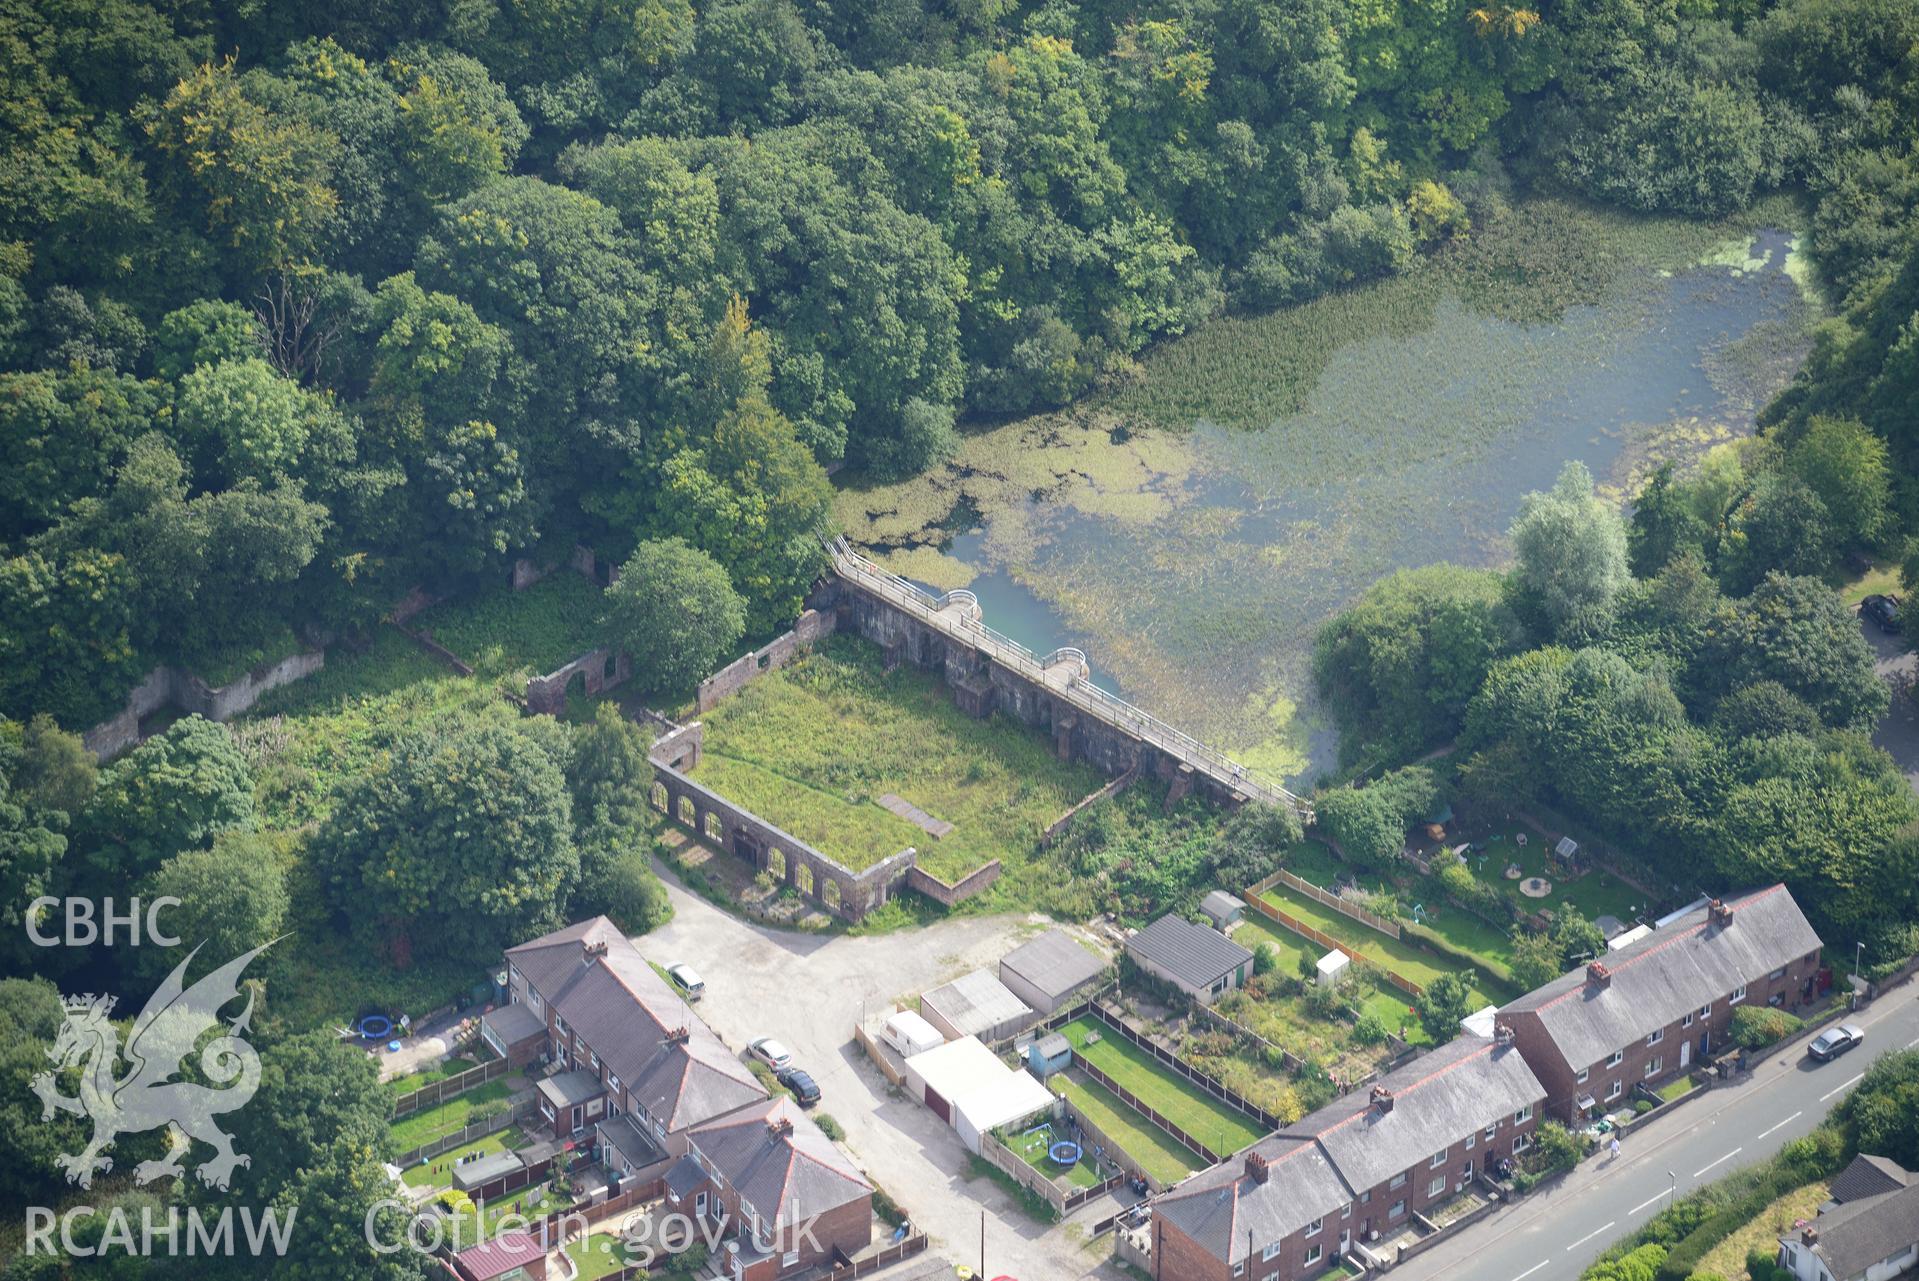 Meadow Mills, Greenfield Valley Heritage Park, Holywell. Oblique aerial photograph taken during the Royal Commission's programme of archaeological aerial reconnaissance by Toby Driver on 11th September 2015.